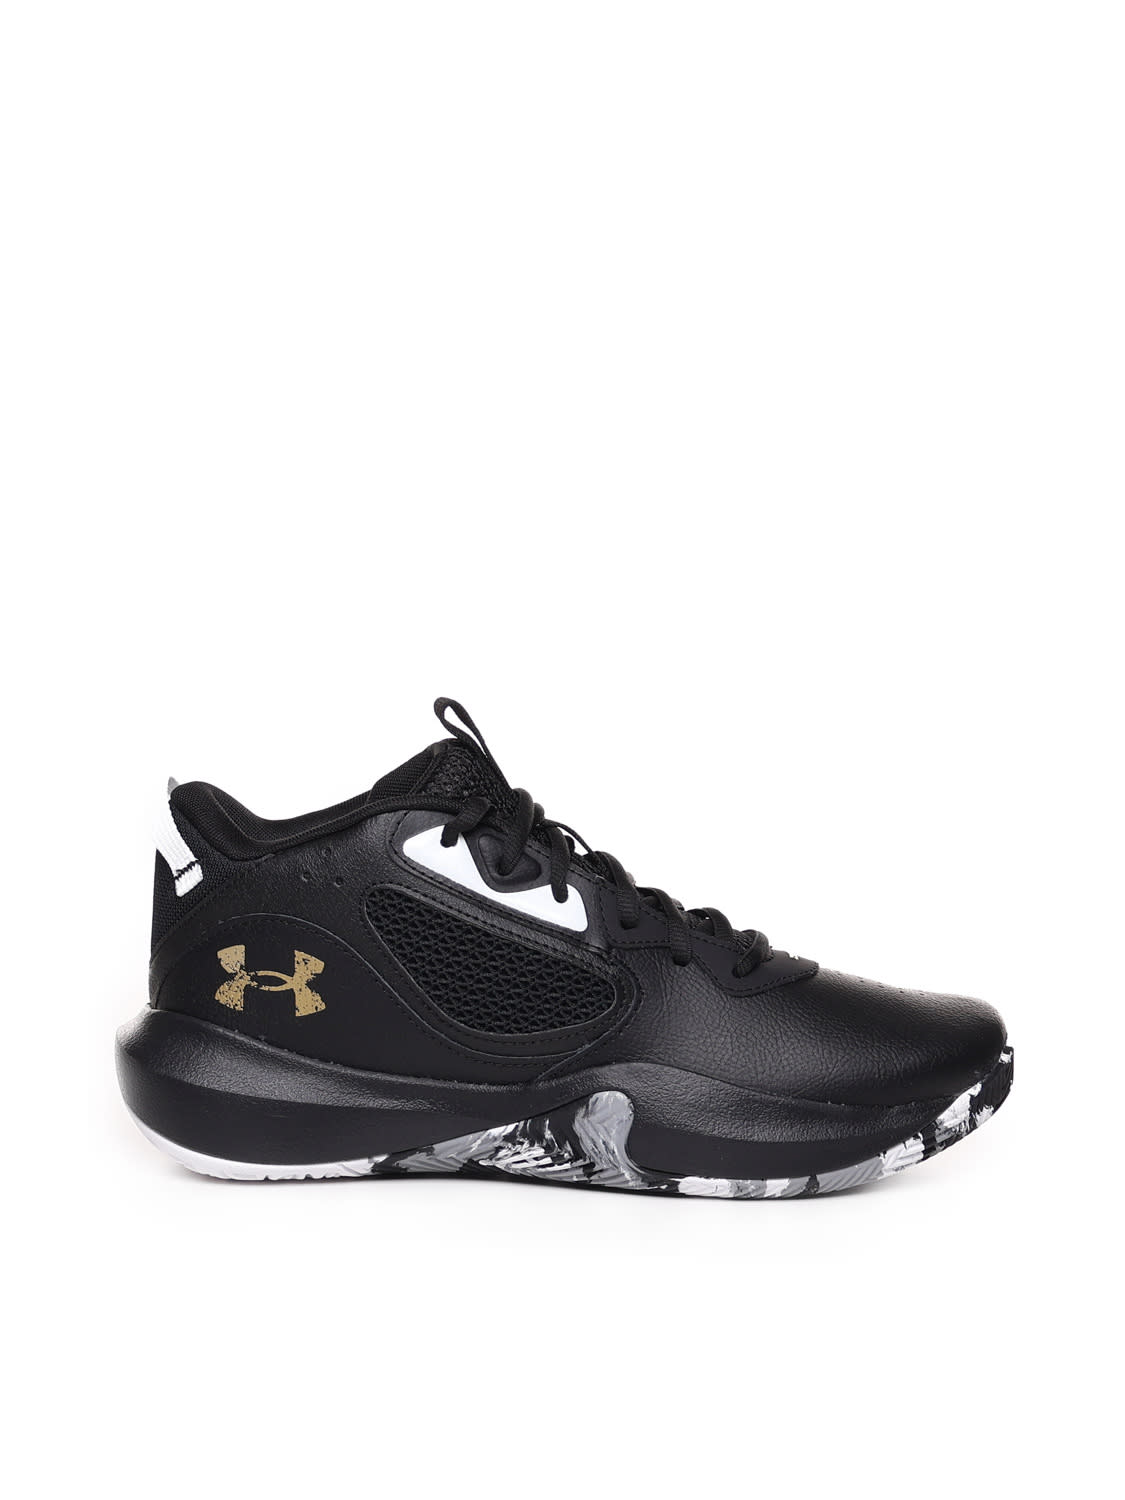 Under Armour Ua Lockdown 6 Basketball Shoes In Black